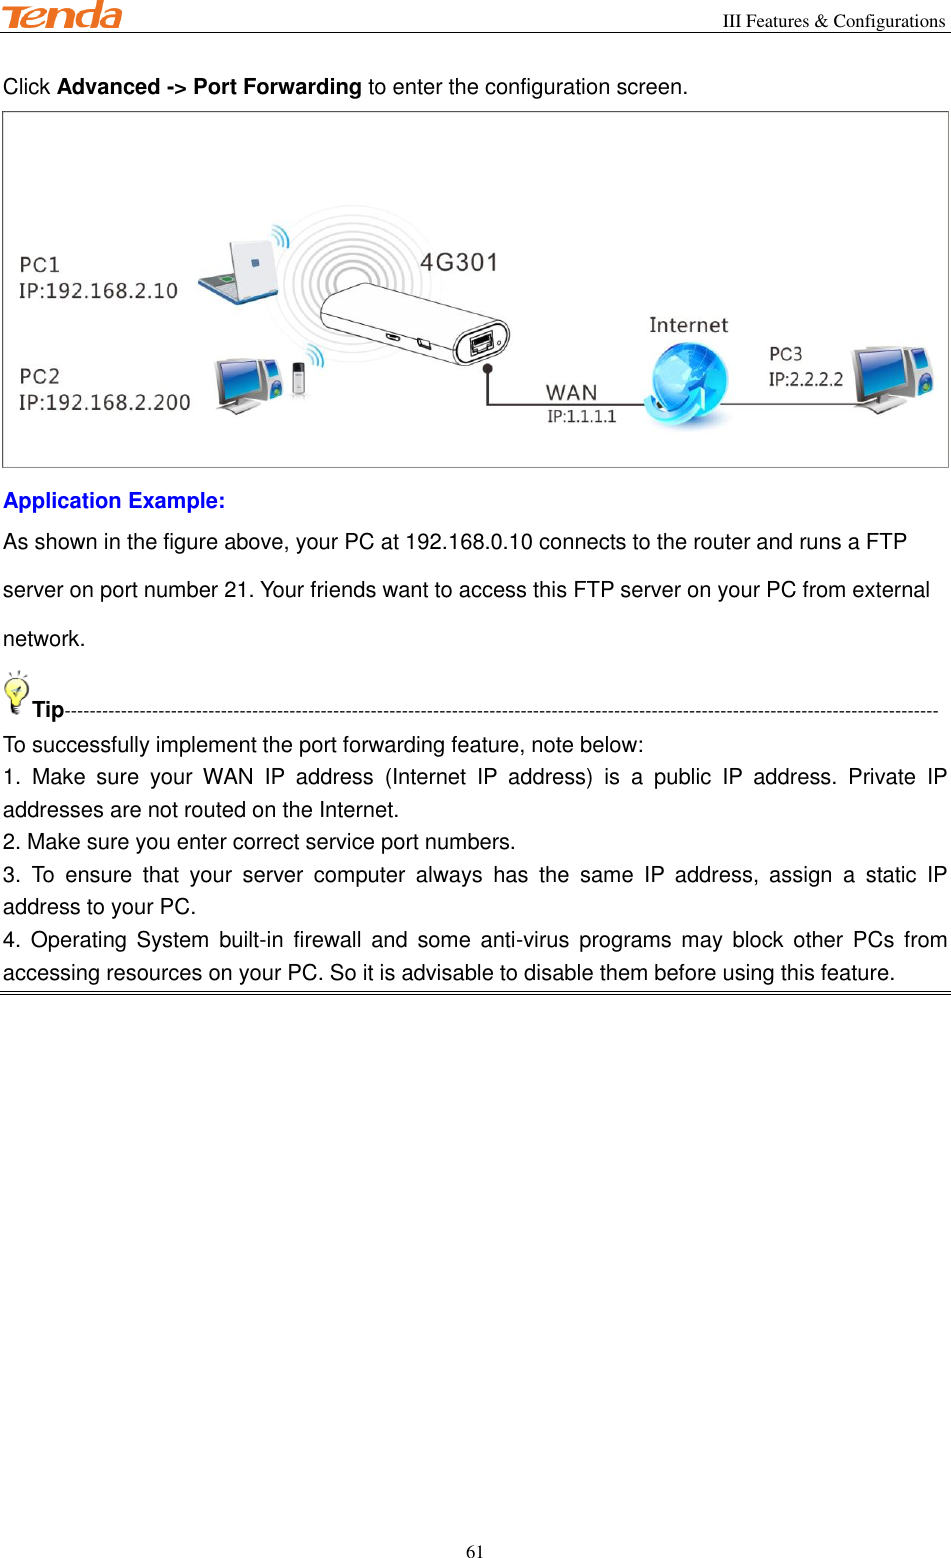                                                        III Features &amp; Configurations           61 Click Advanced -&gt; Port Forwarding to enter the configuration screen.  Application Example: As shown in the figure above, your PC at 192.168.0.10 connects to the router and runs a FTP server on port number 21. Your friends want to access this FTP server on your PC from external network. Tip-------------------------------------------------------------------------------------------------------------------------------------------- To successfully implement the port forwarding feature, note below: 1.  Make  sure  your  WAN  IP  address  (Internet  IP  address)  is  a  public  IP  address.  Private  IP addresses are not routed on the Internet. 2. Make sure you enter correct service port numbers. 3.  To  ensure  that  your  server  computer  always  has  the  same  IP  address,  assign  a  static  IP address to your PC. 4.  Operating  System  built-in  firewall  and  some  anti-virus  programs may  block  other  PCs  from accessing resources on your PC. So it is advisable to disable them before using this feature. 